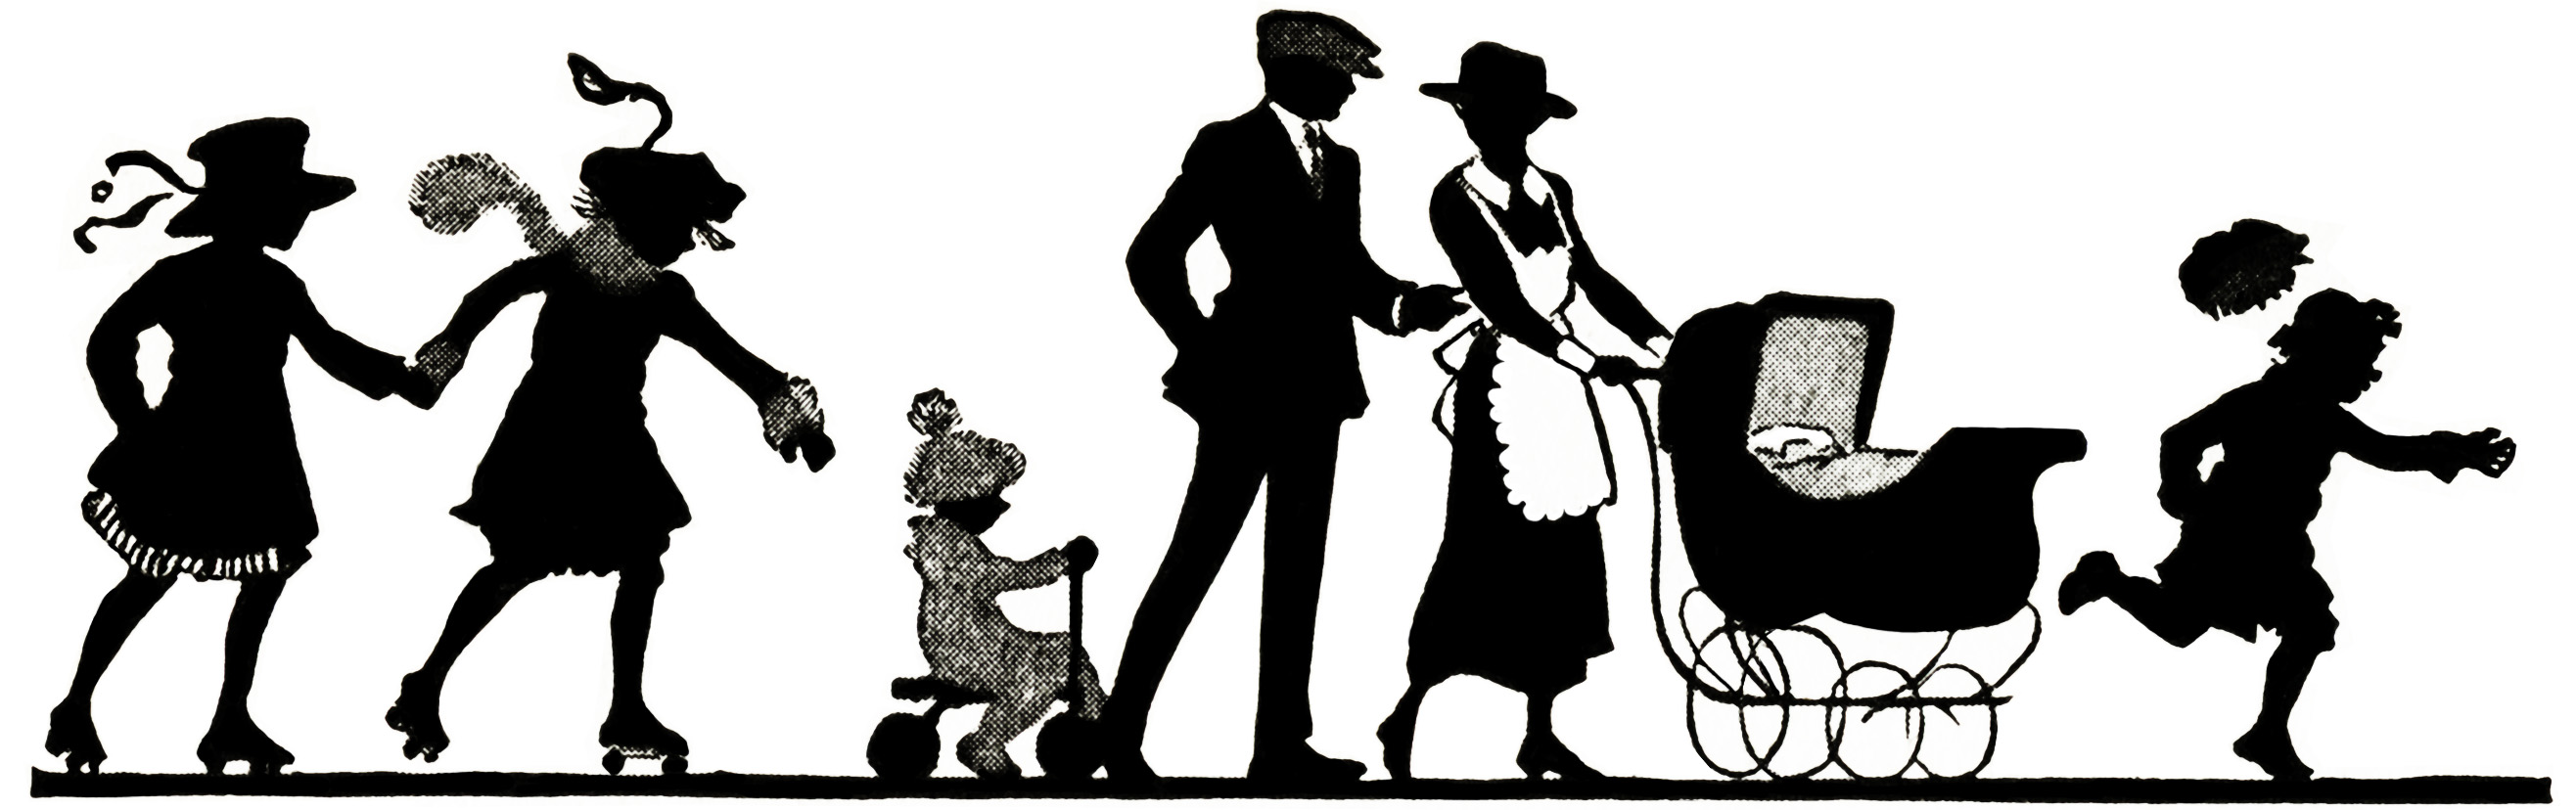 Free Vintage Clipart Family Stroll Silhouette | Old Design Shop Blog